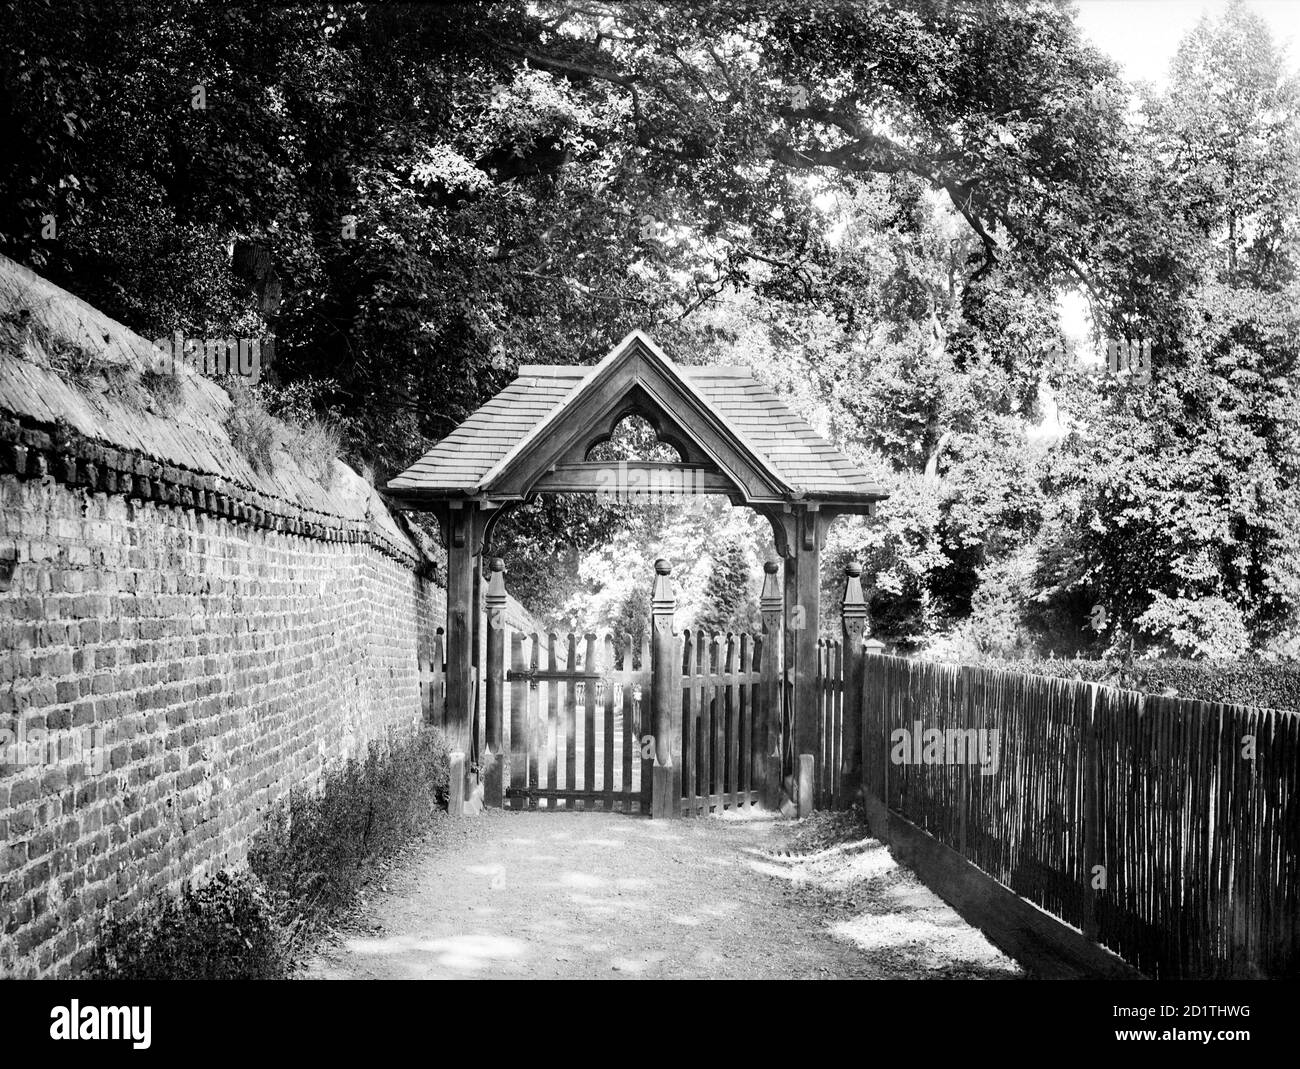 ST ANDREWS CHURCH, Sonning, Berkshire. The wooden lych gate of the church, built in the Victorian period, with a narrow lane behind. Photographed by Henry Taunt (active 1860 - 1922). Stock Photo